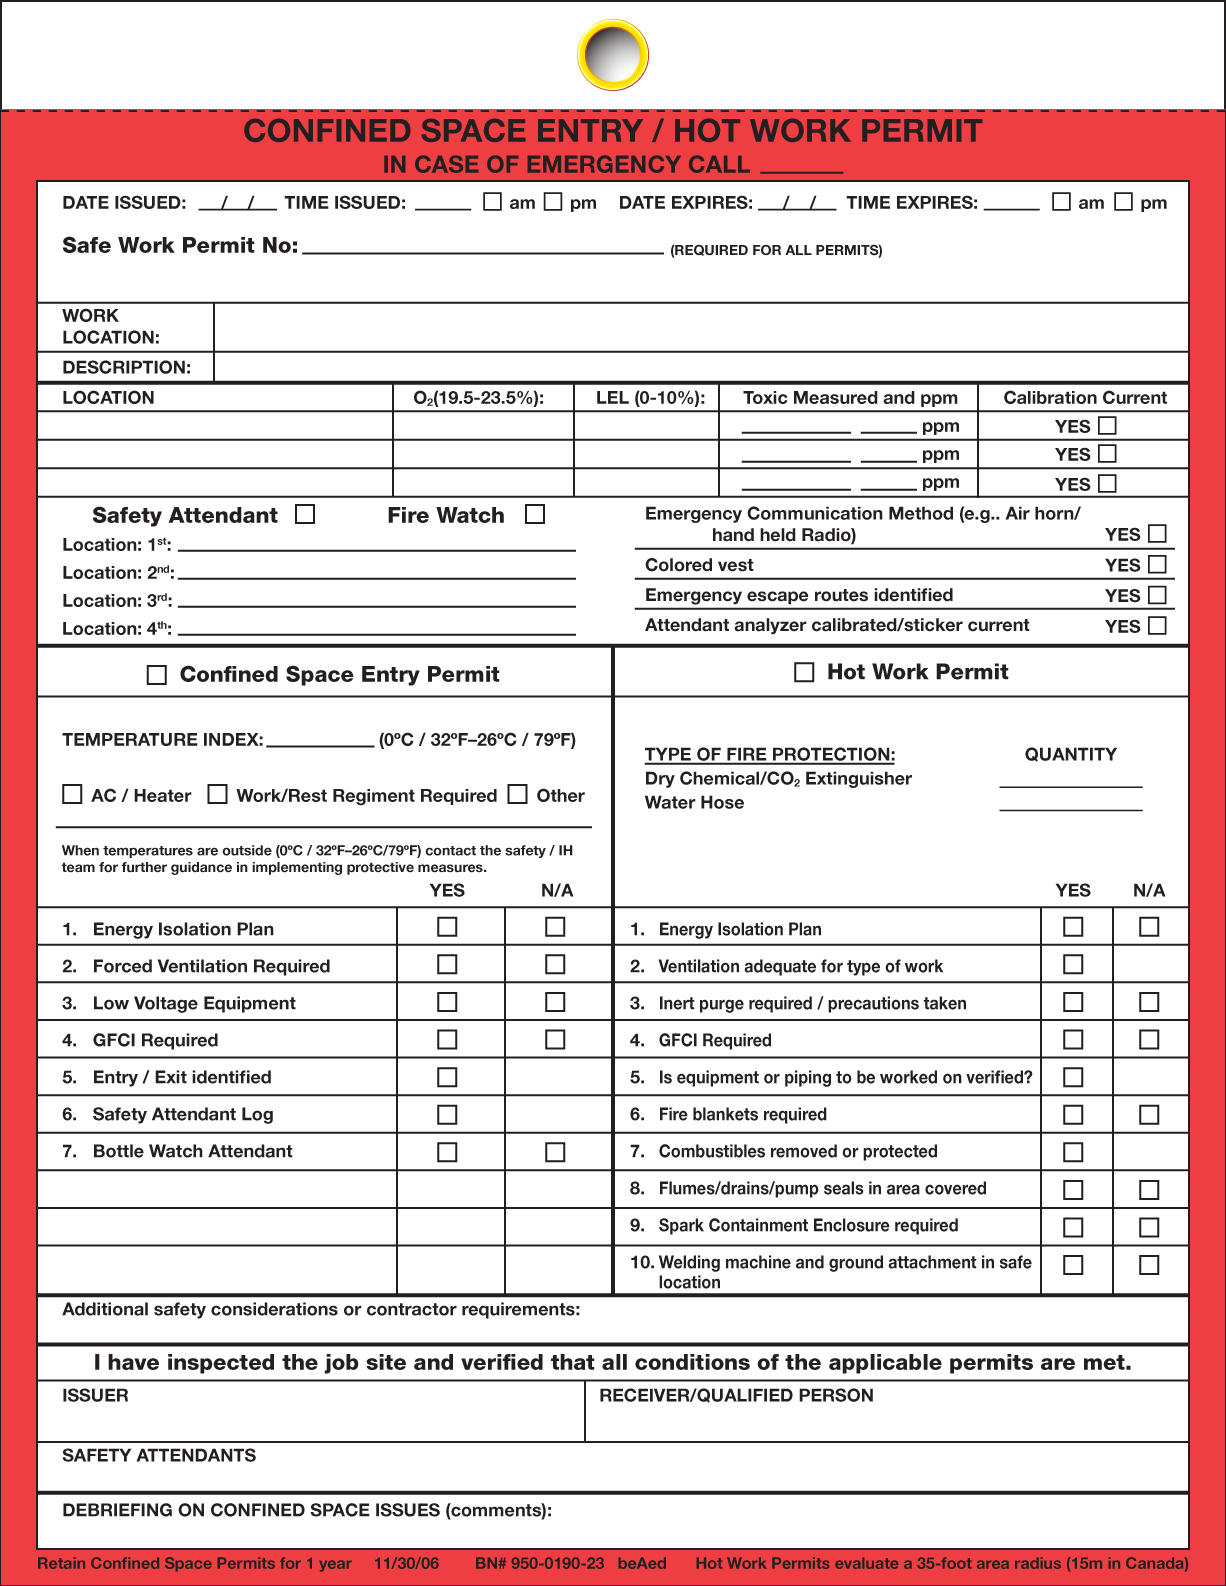 CONFINED SPACE ENTRY/ HOT WORK PERMIT FORM QIA Celanese Pasadena